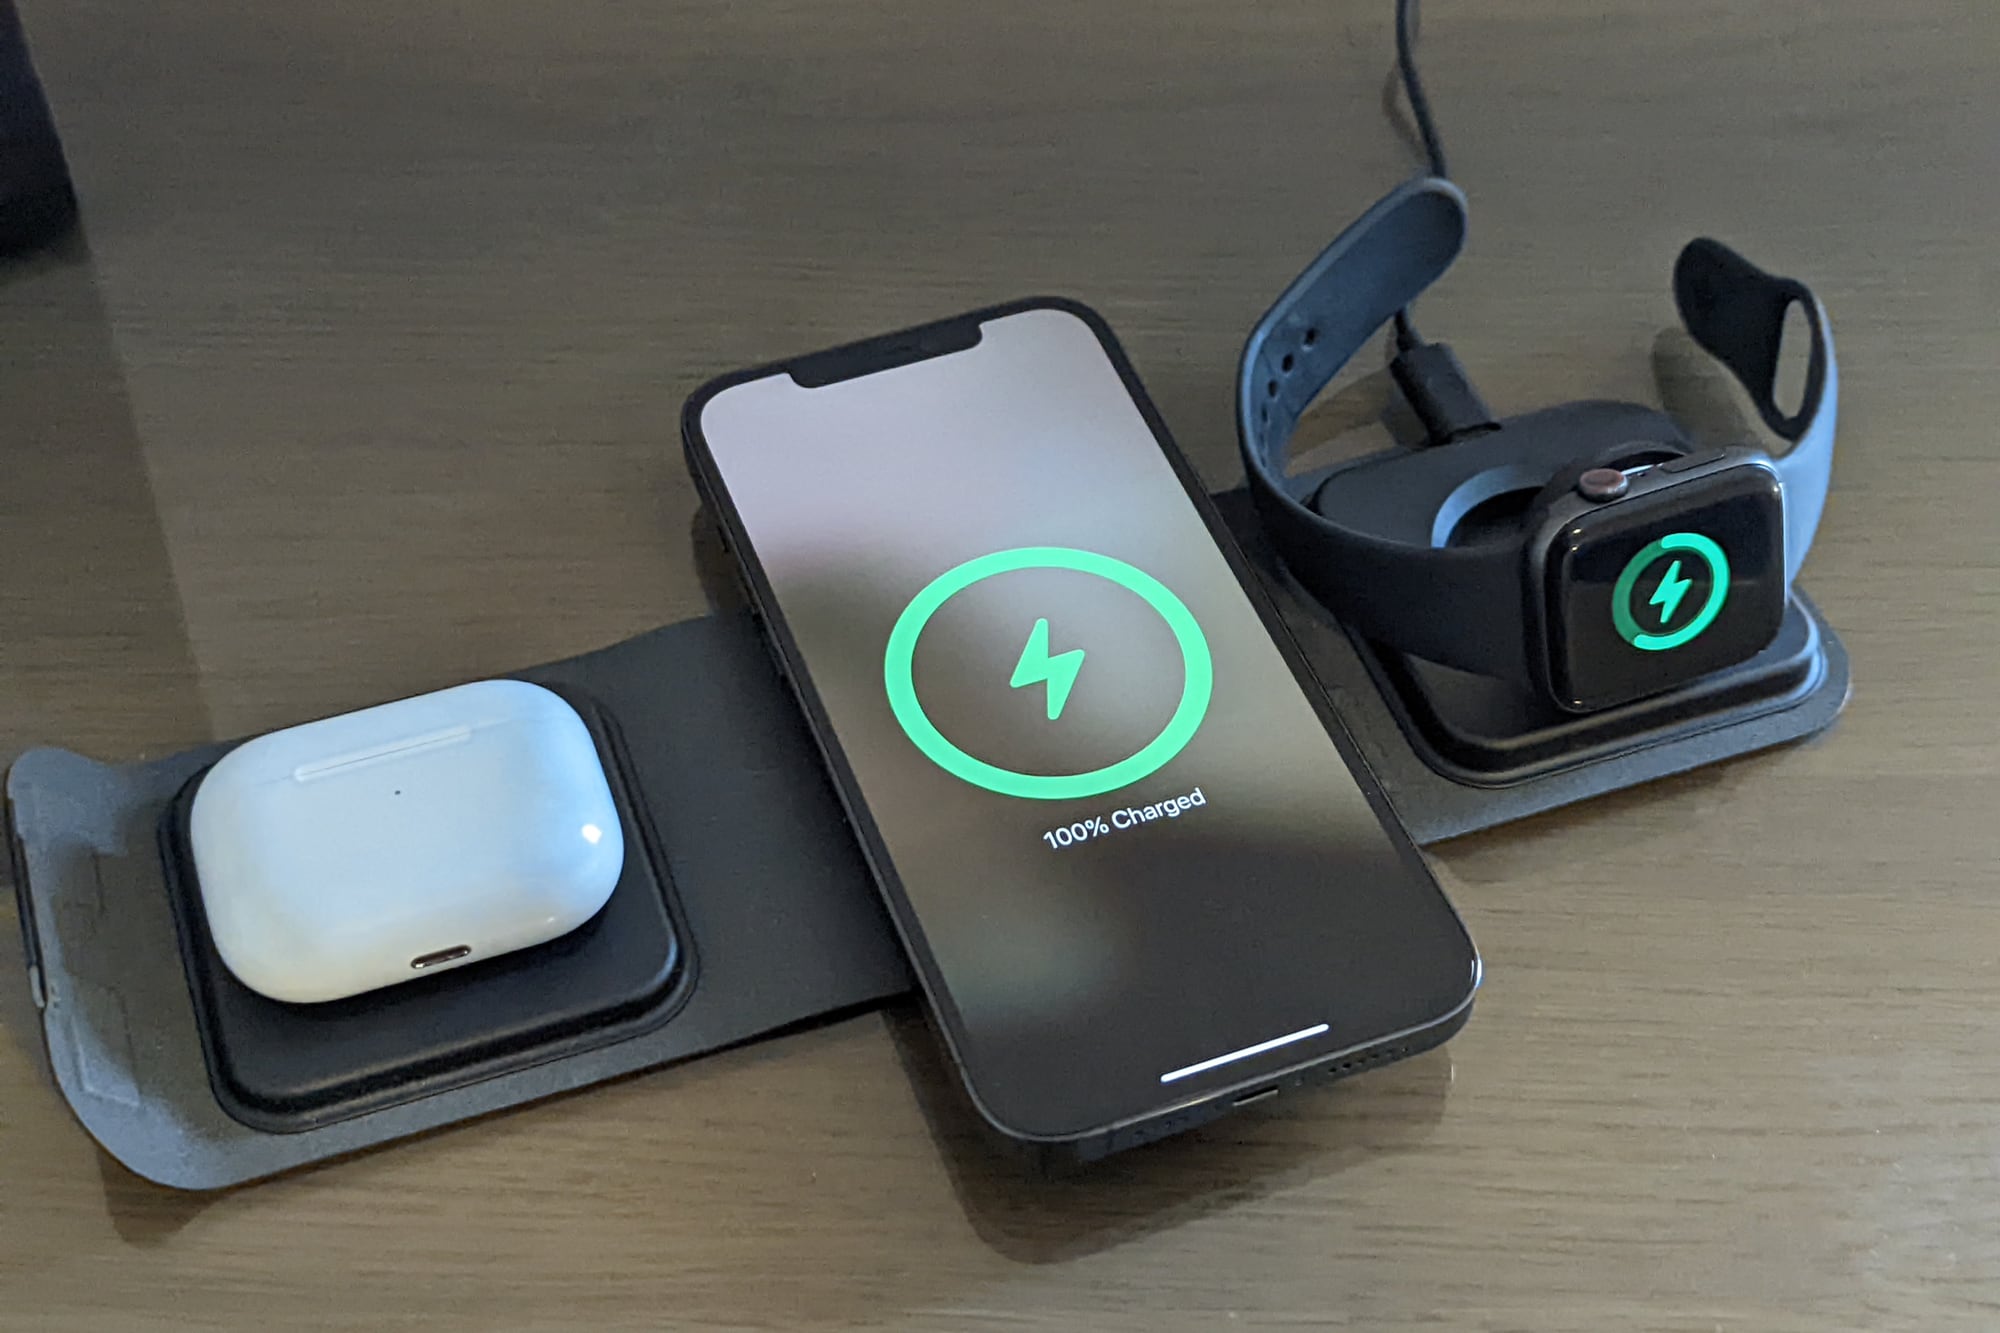 mophie's new 3-in-1 wireless charging stand with MagSafe